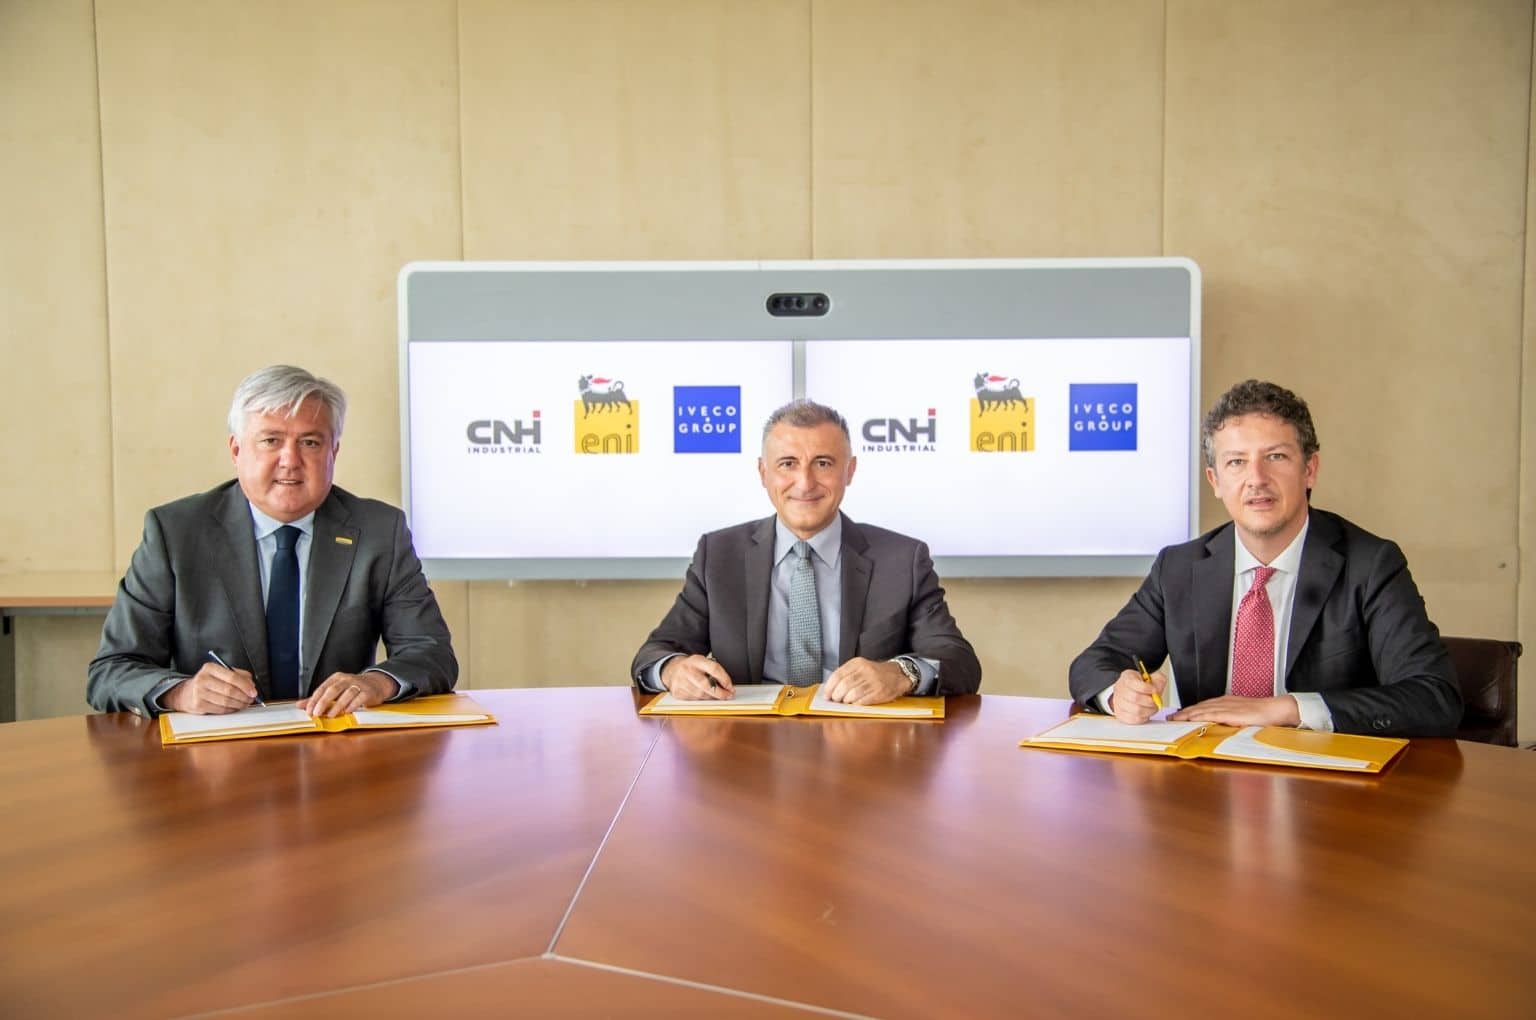 Eni, CNH and Iveco sign MOU